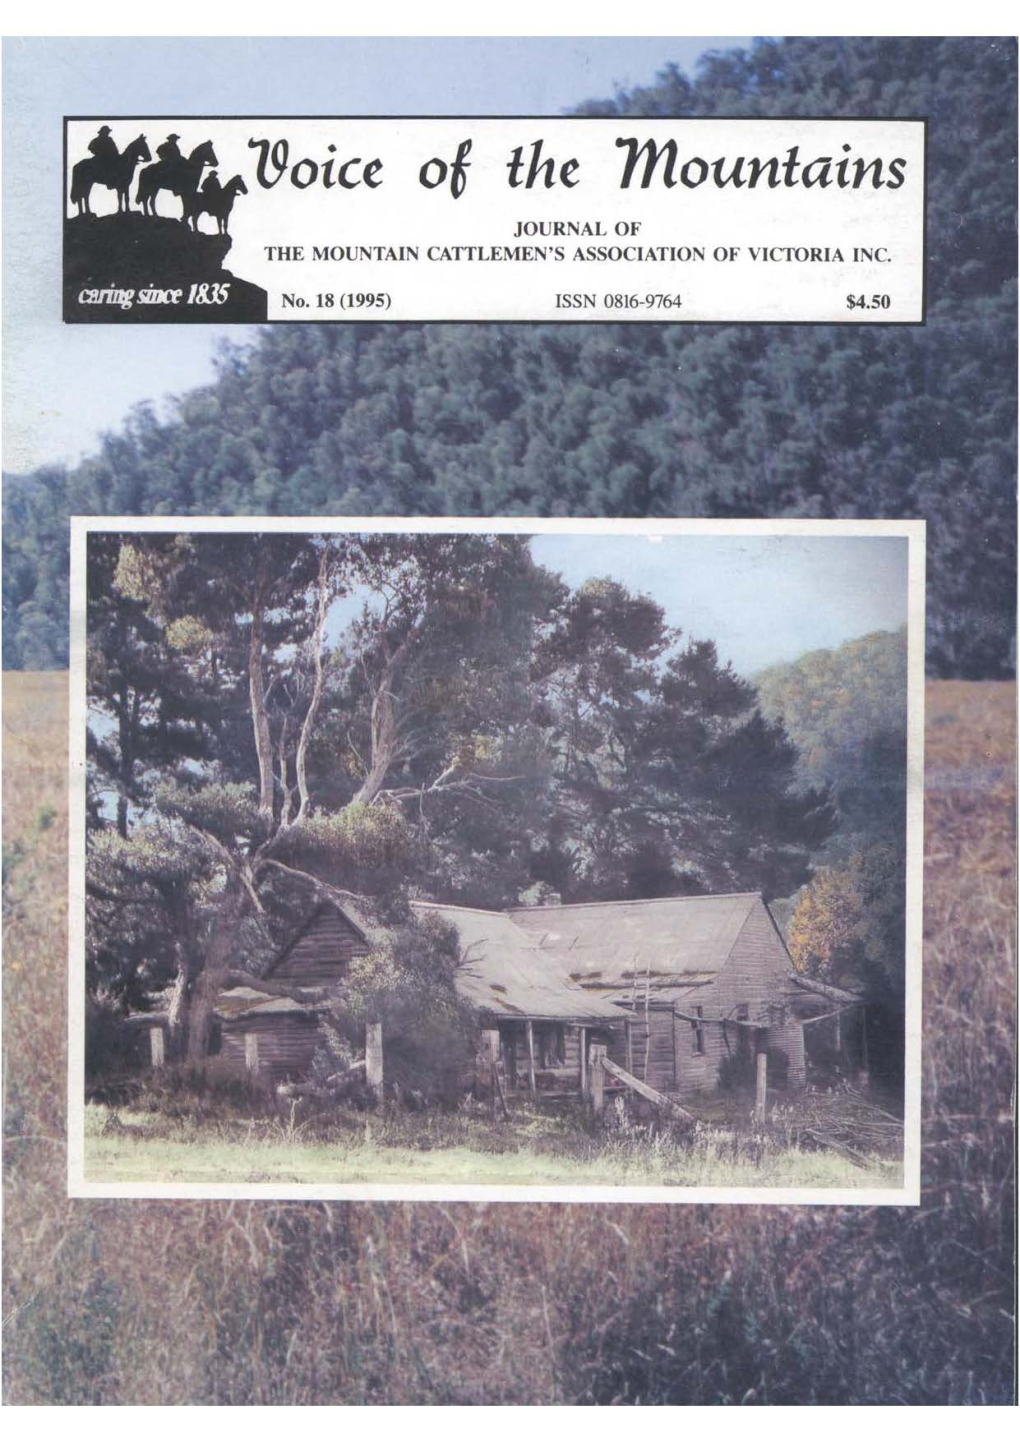 19Oice of Lhe Mounlains JOURNAL of the MOUNTAIN CATTLEMEN's ASSOCIATION of VICTORIA INC